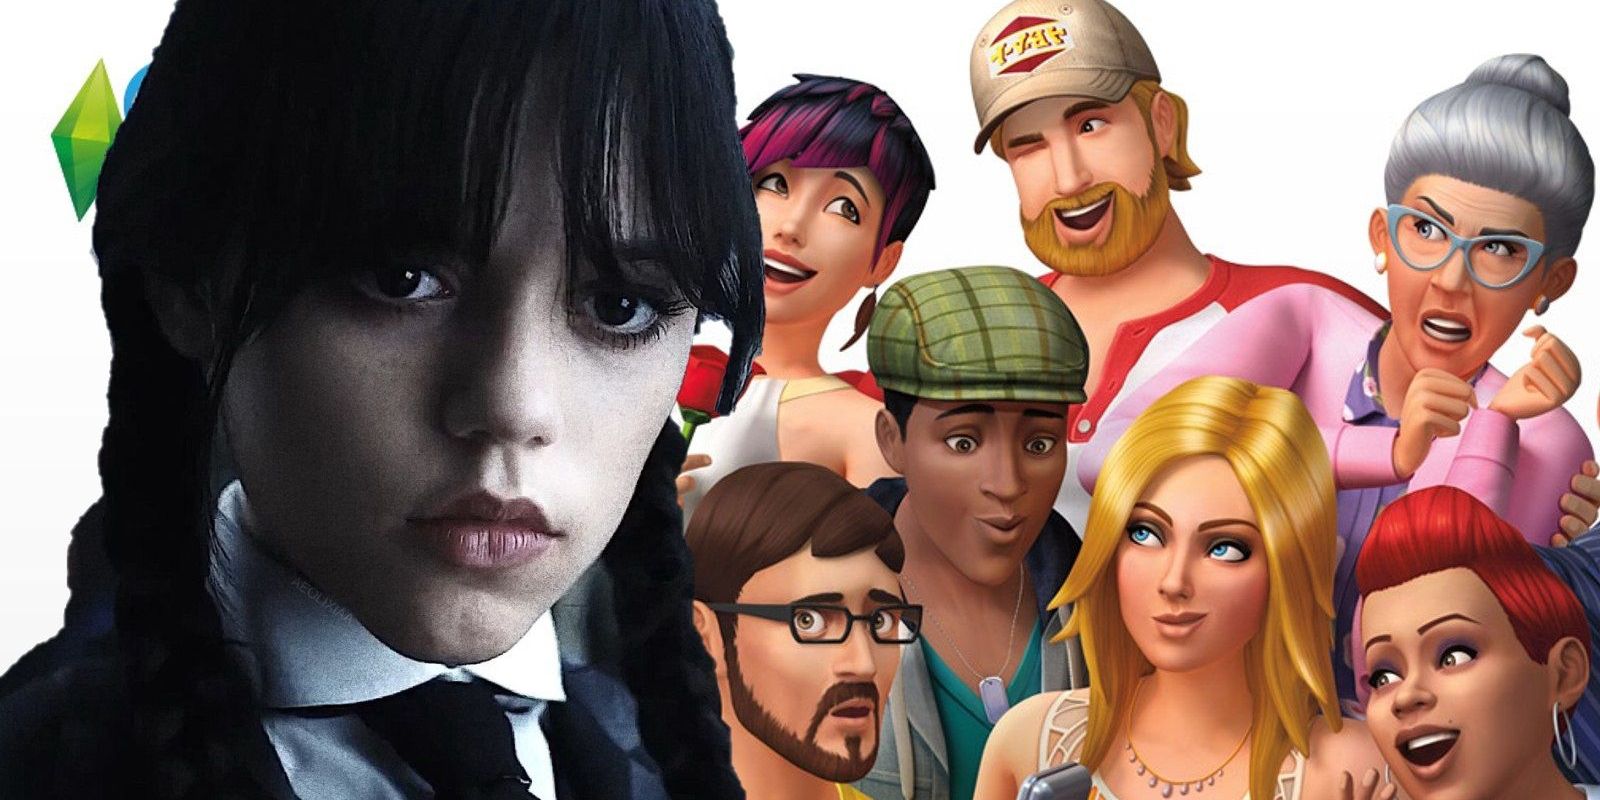 Wednesday Addams from the Netflix series superimposed onto title art for The Sims 4, showing a group of Sims all making different faces.